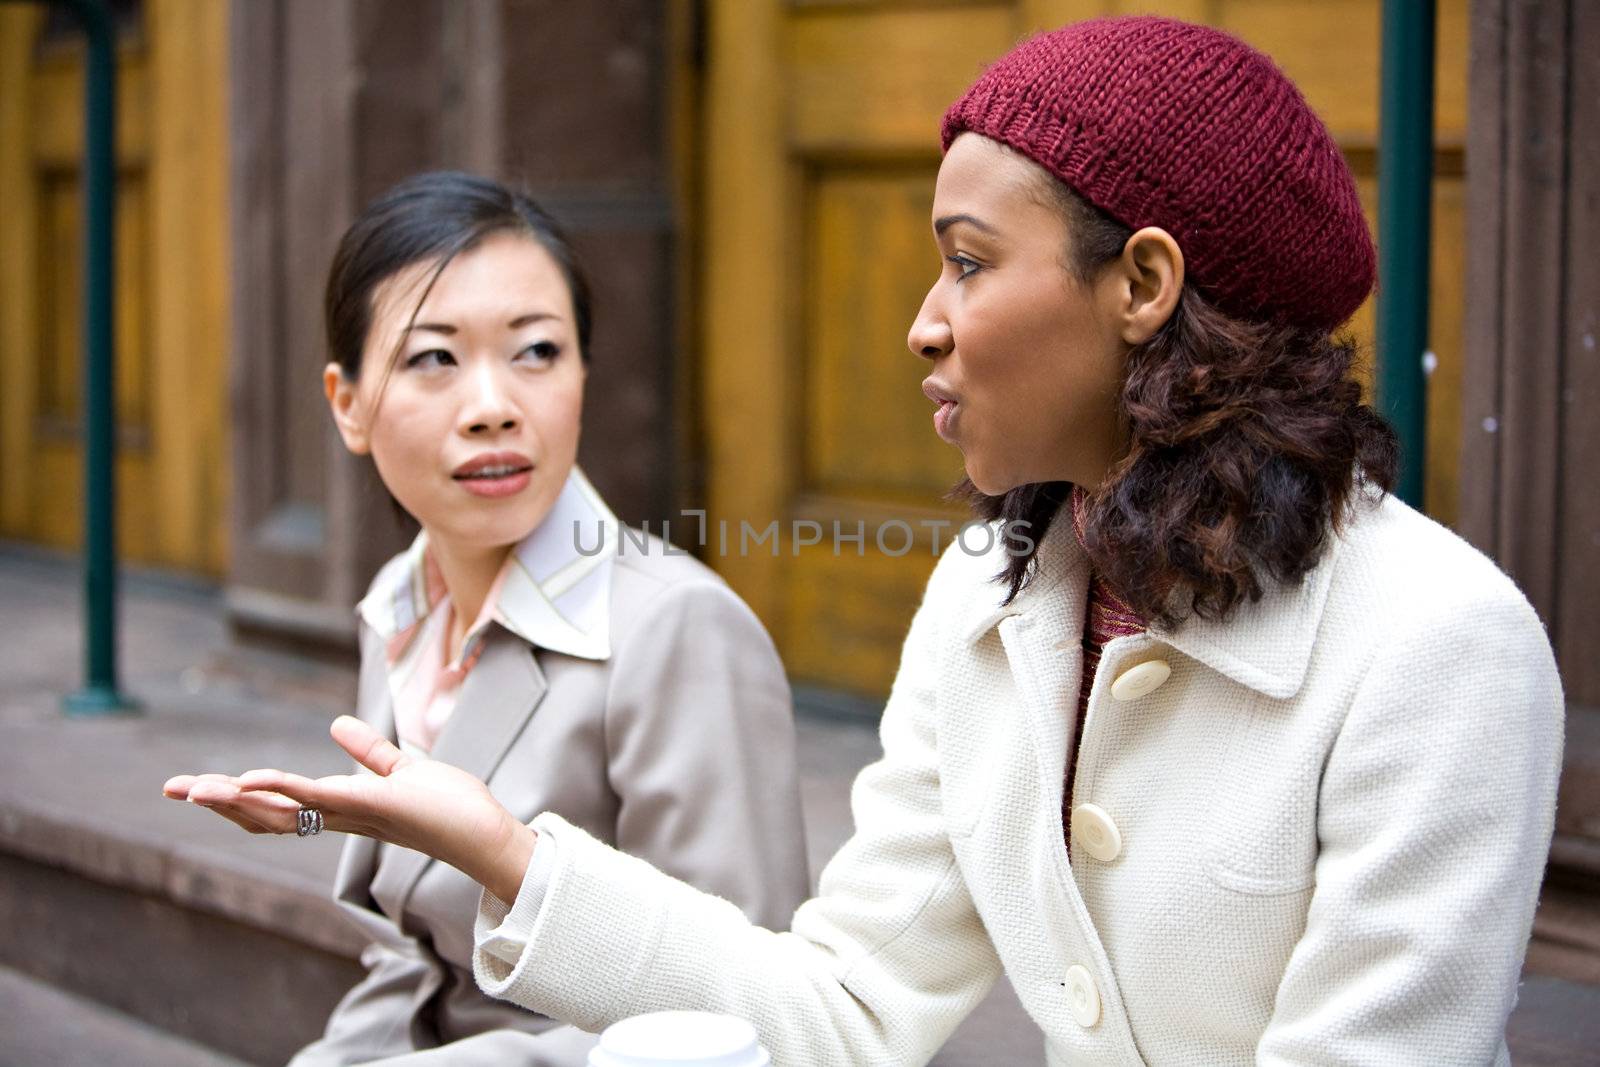 Two business women having a casual chat or discussion in the city perhaps on their lunch break. Shallow depth of field.